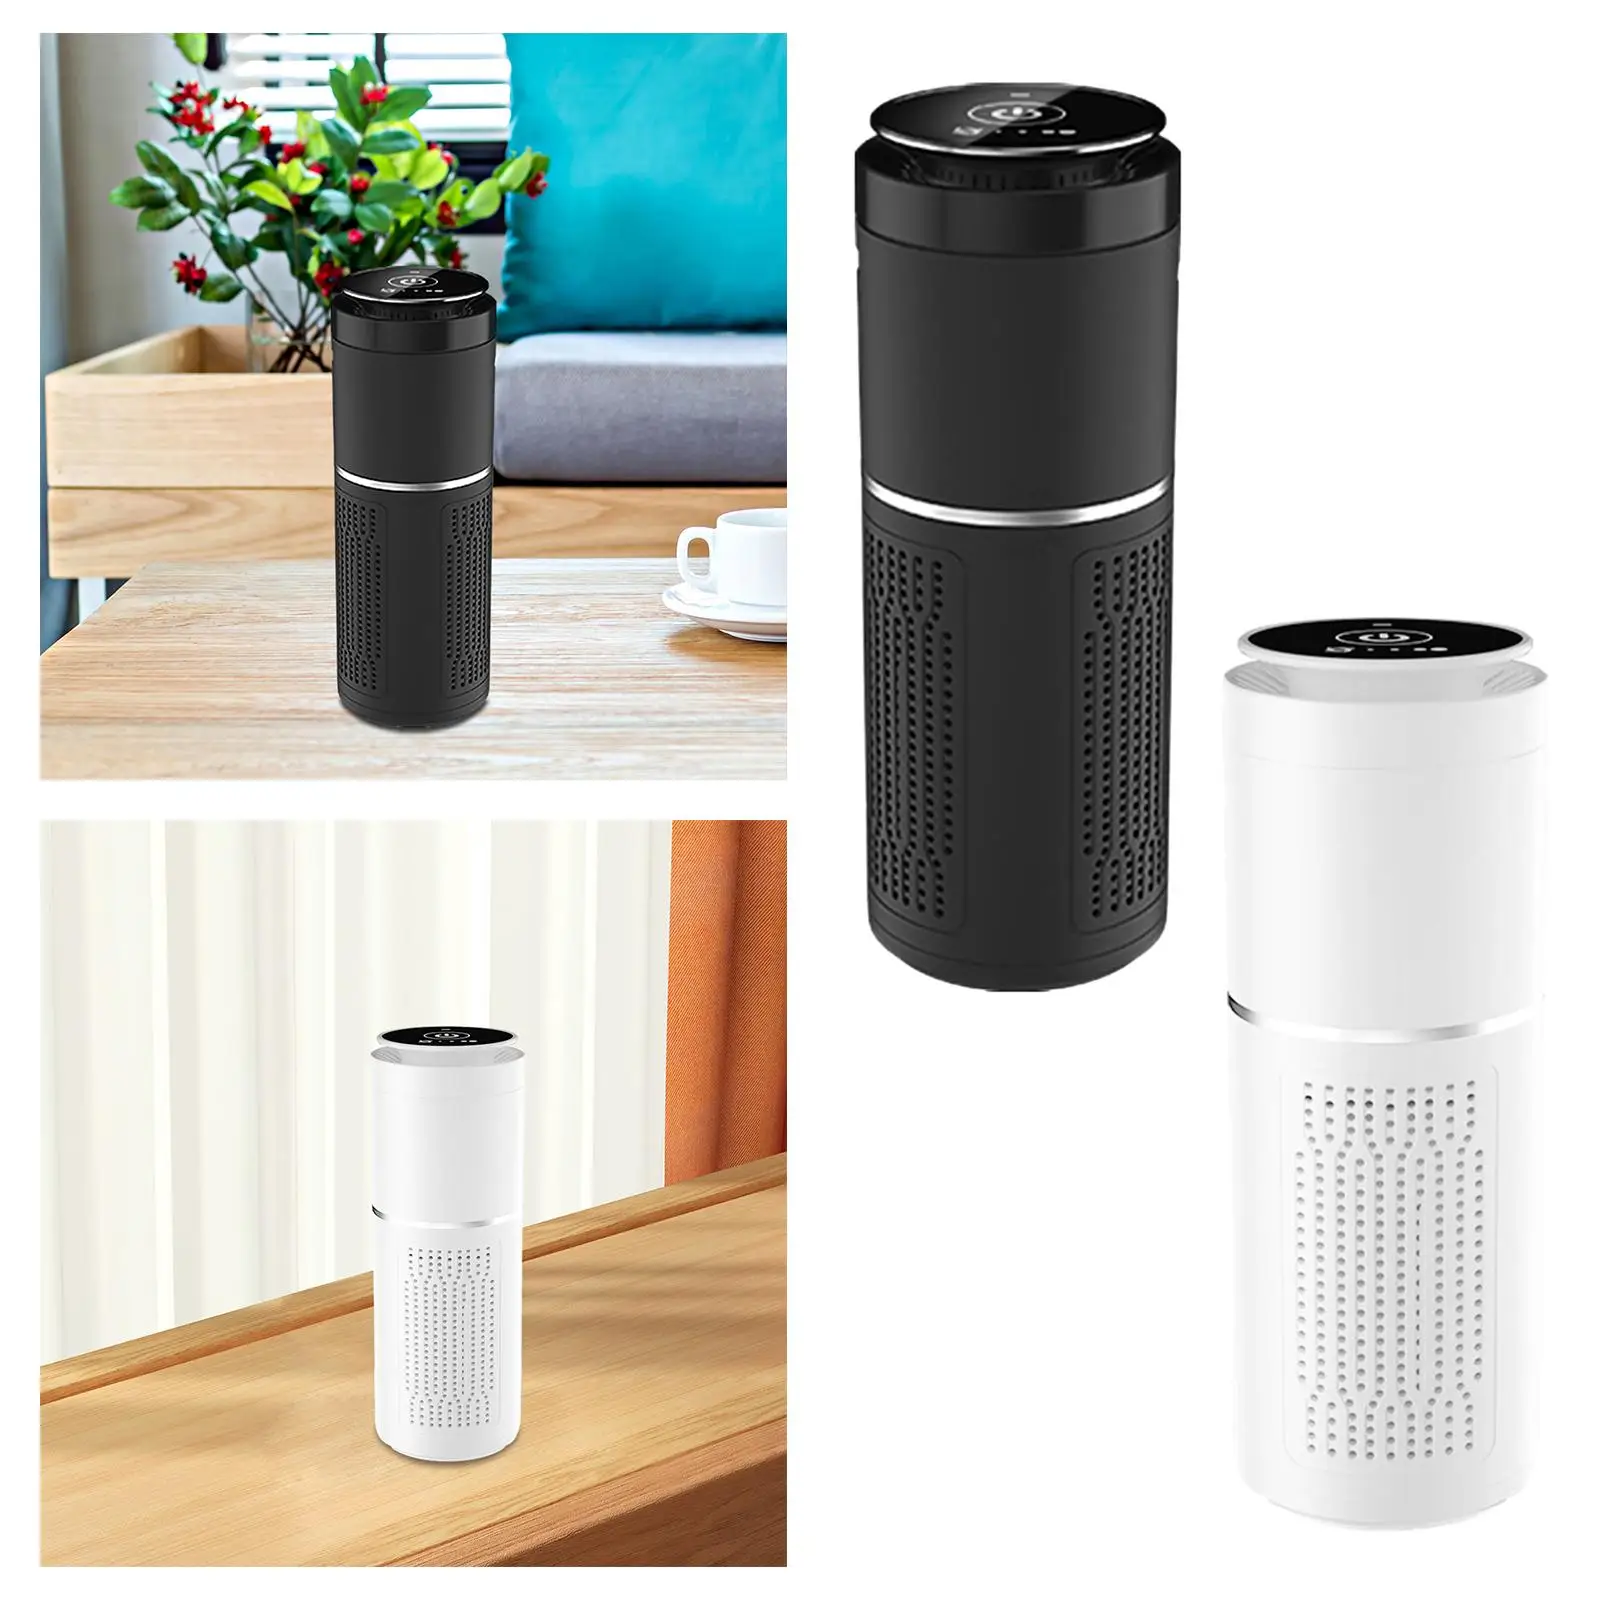 Personal Air Purifier Silent Remove Formaldehyde Remove Odors Smoke Dust with Light for Home Living Room Indoor Car Tabletop